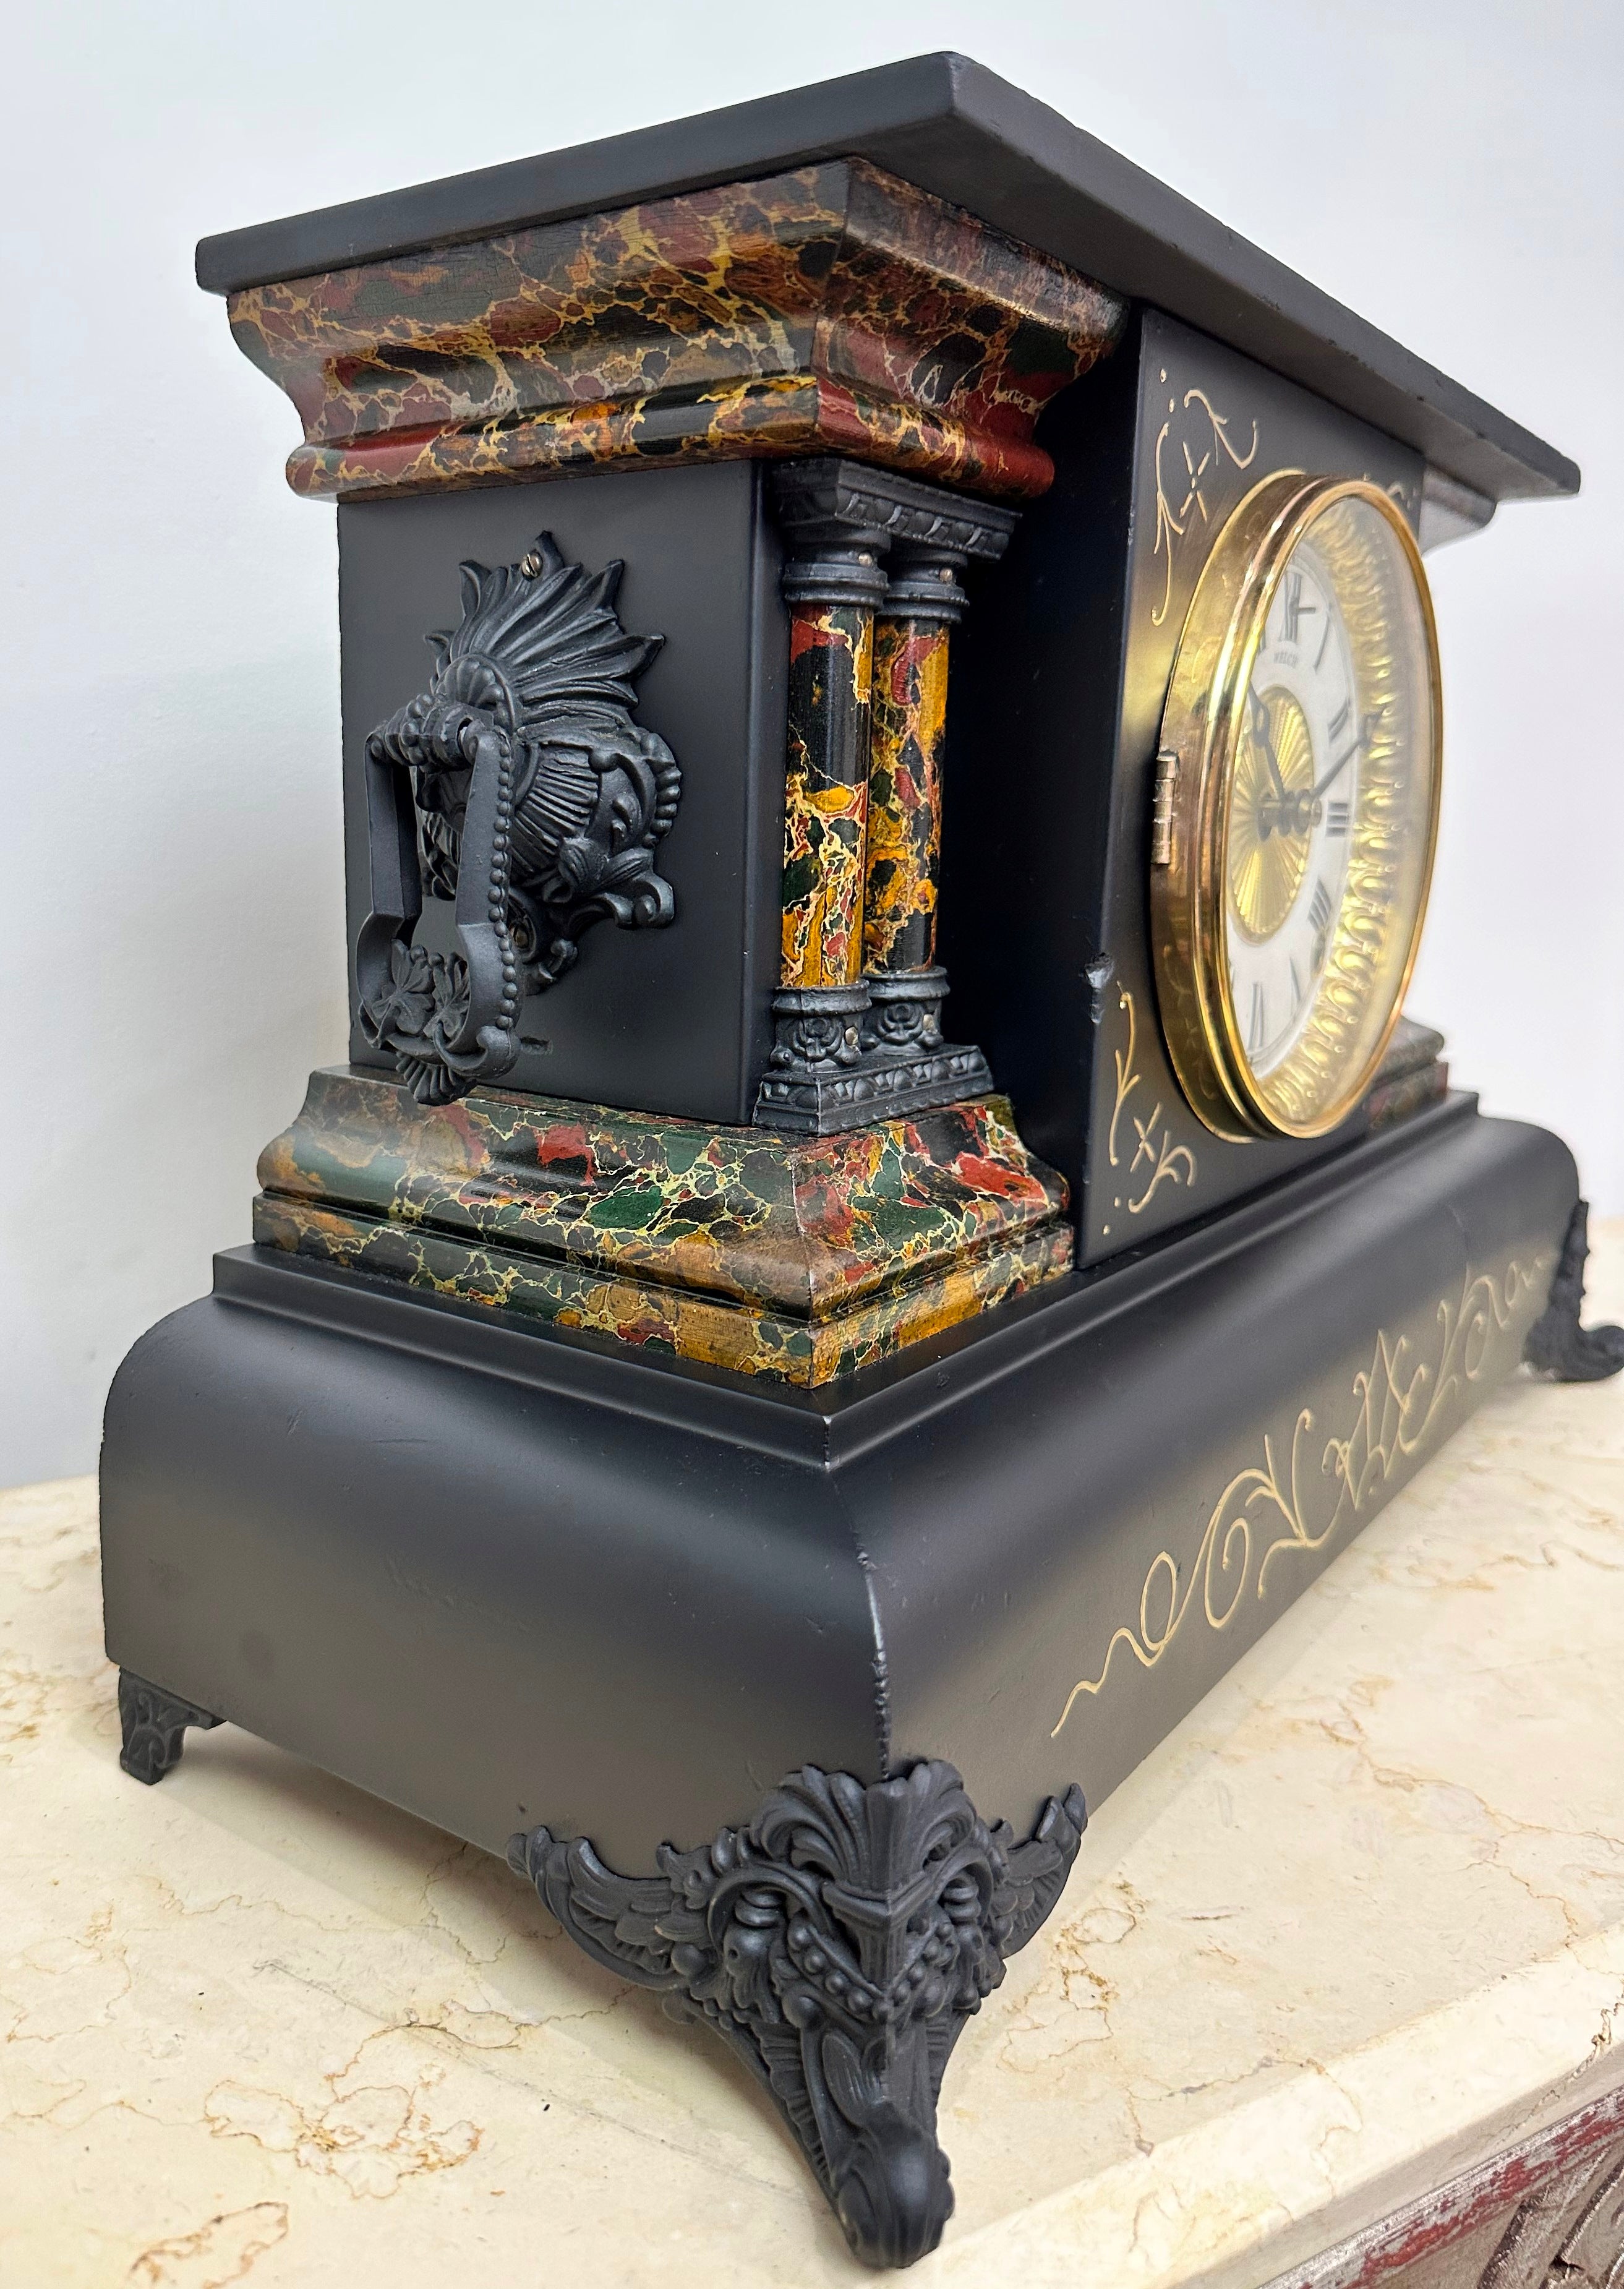 Antique WELCH Hammer on Bell & Coil Chime Mantel Clock | eXibit collection